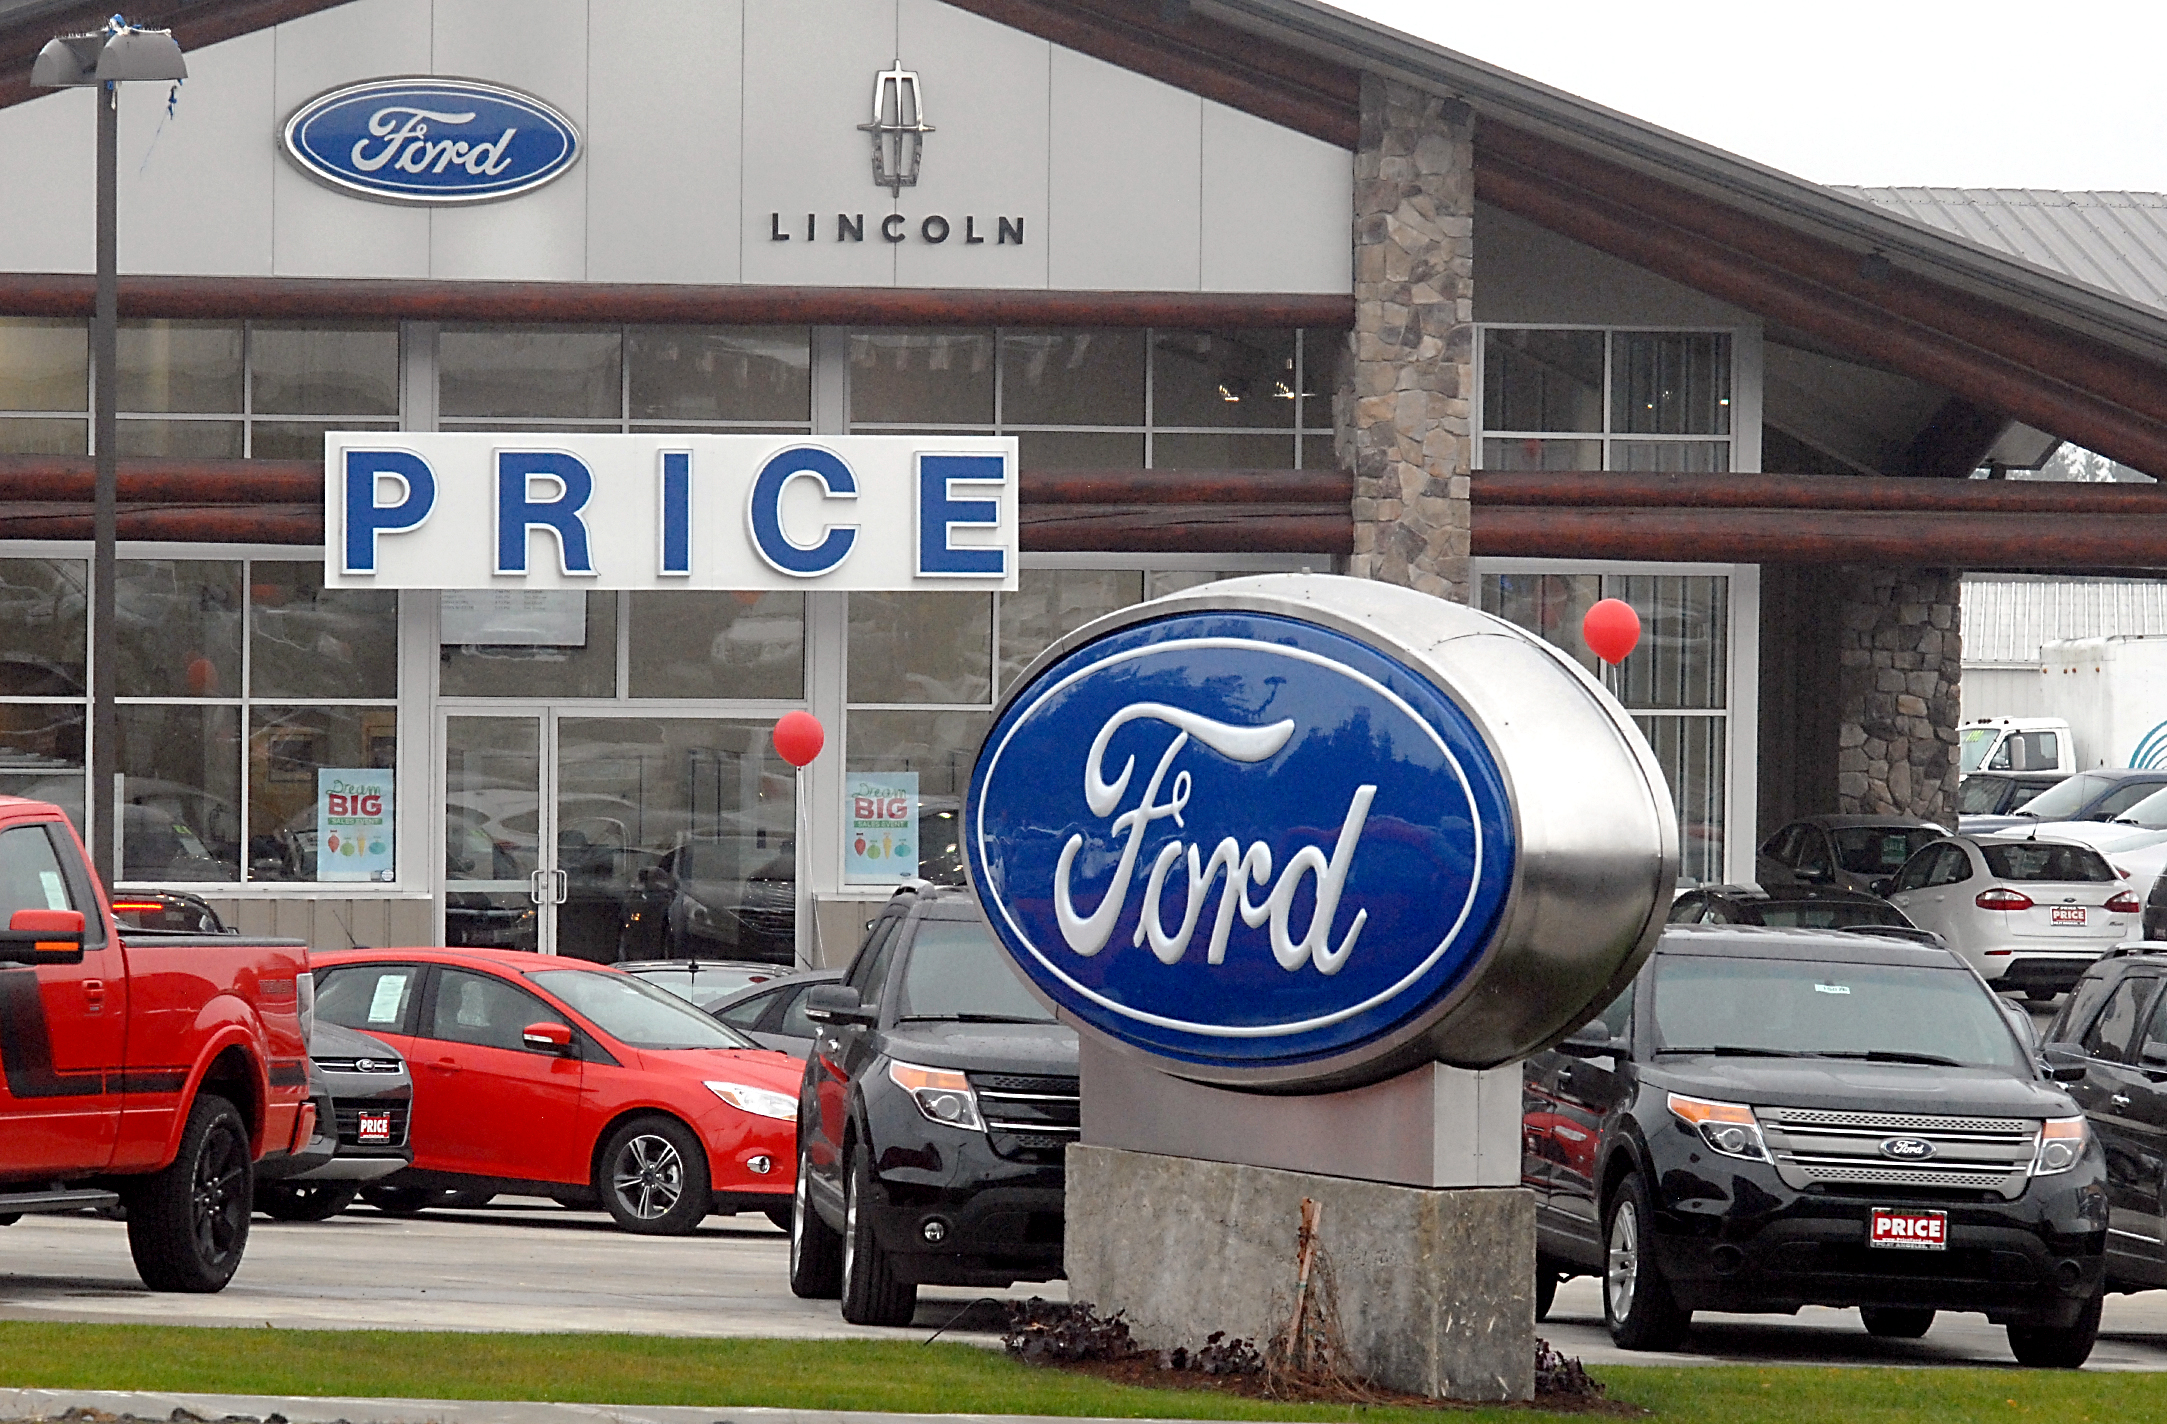 Enjoy unlimited access to PDN website this holiday weekend, proudly sponsored by Price Ford Lincoln of Port Angeles